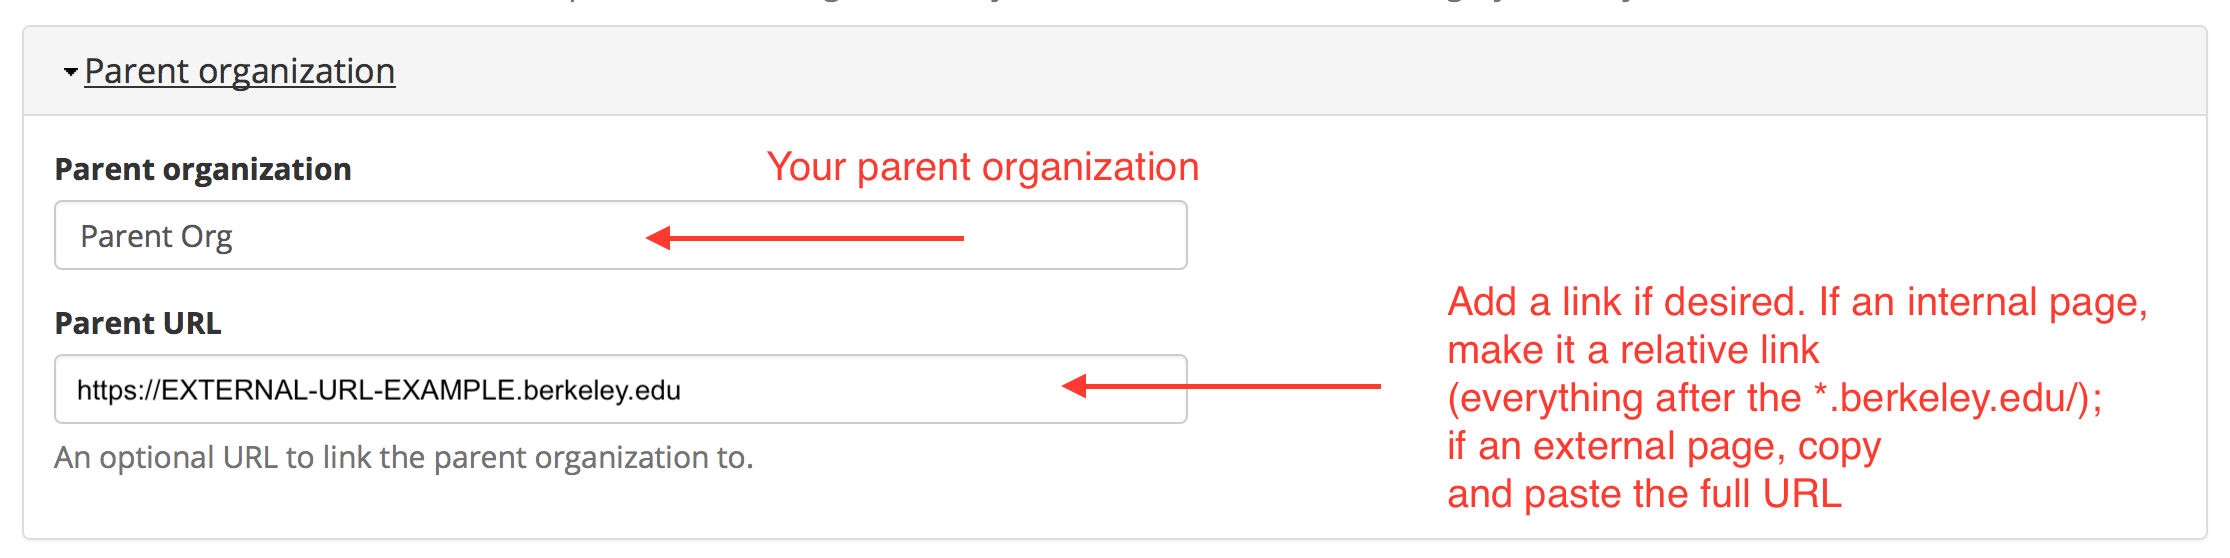 Example of Parent Org